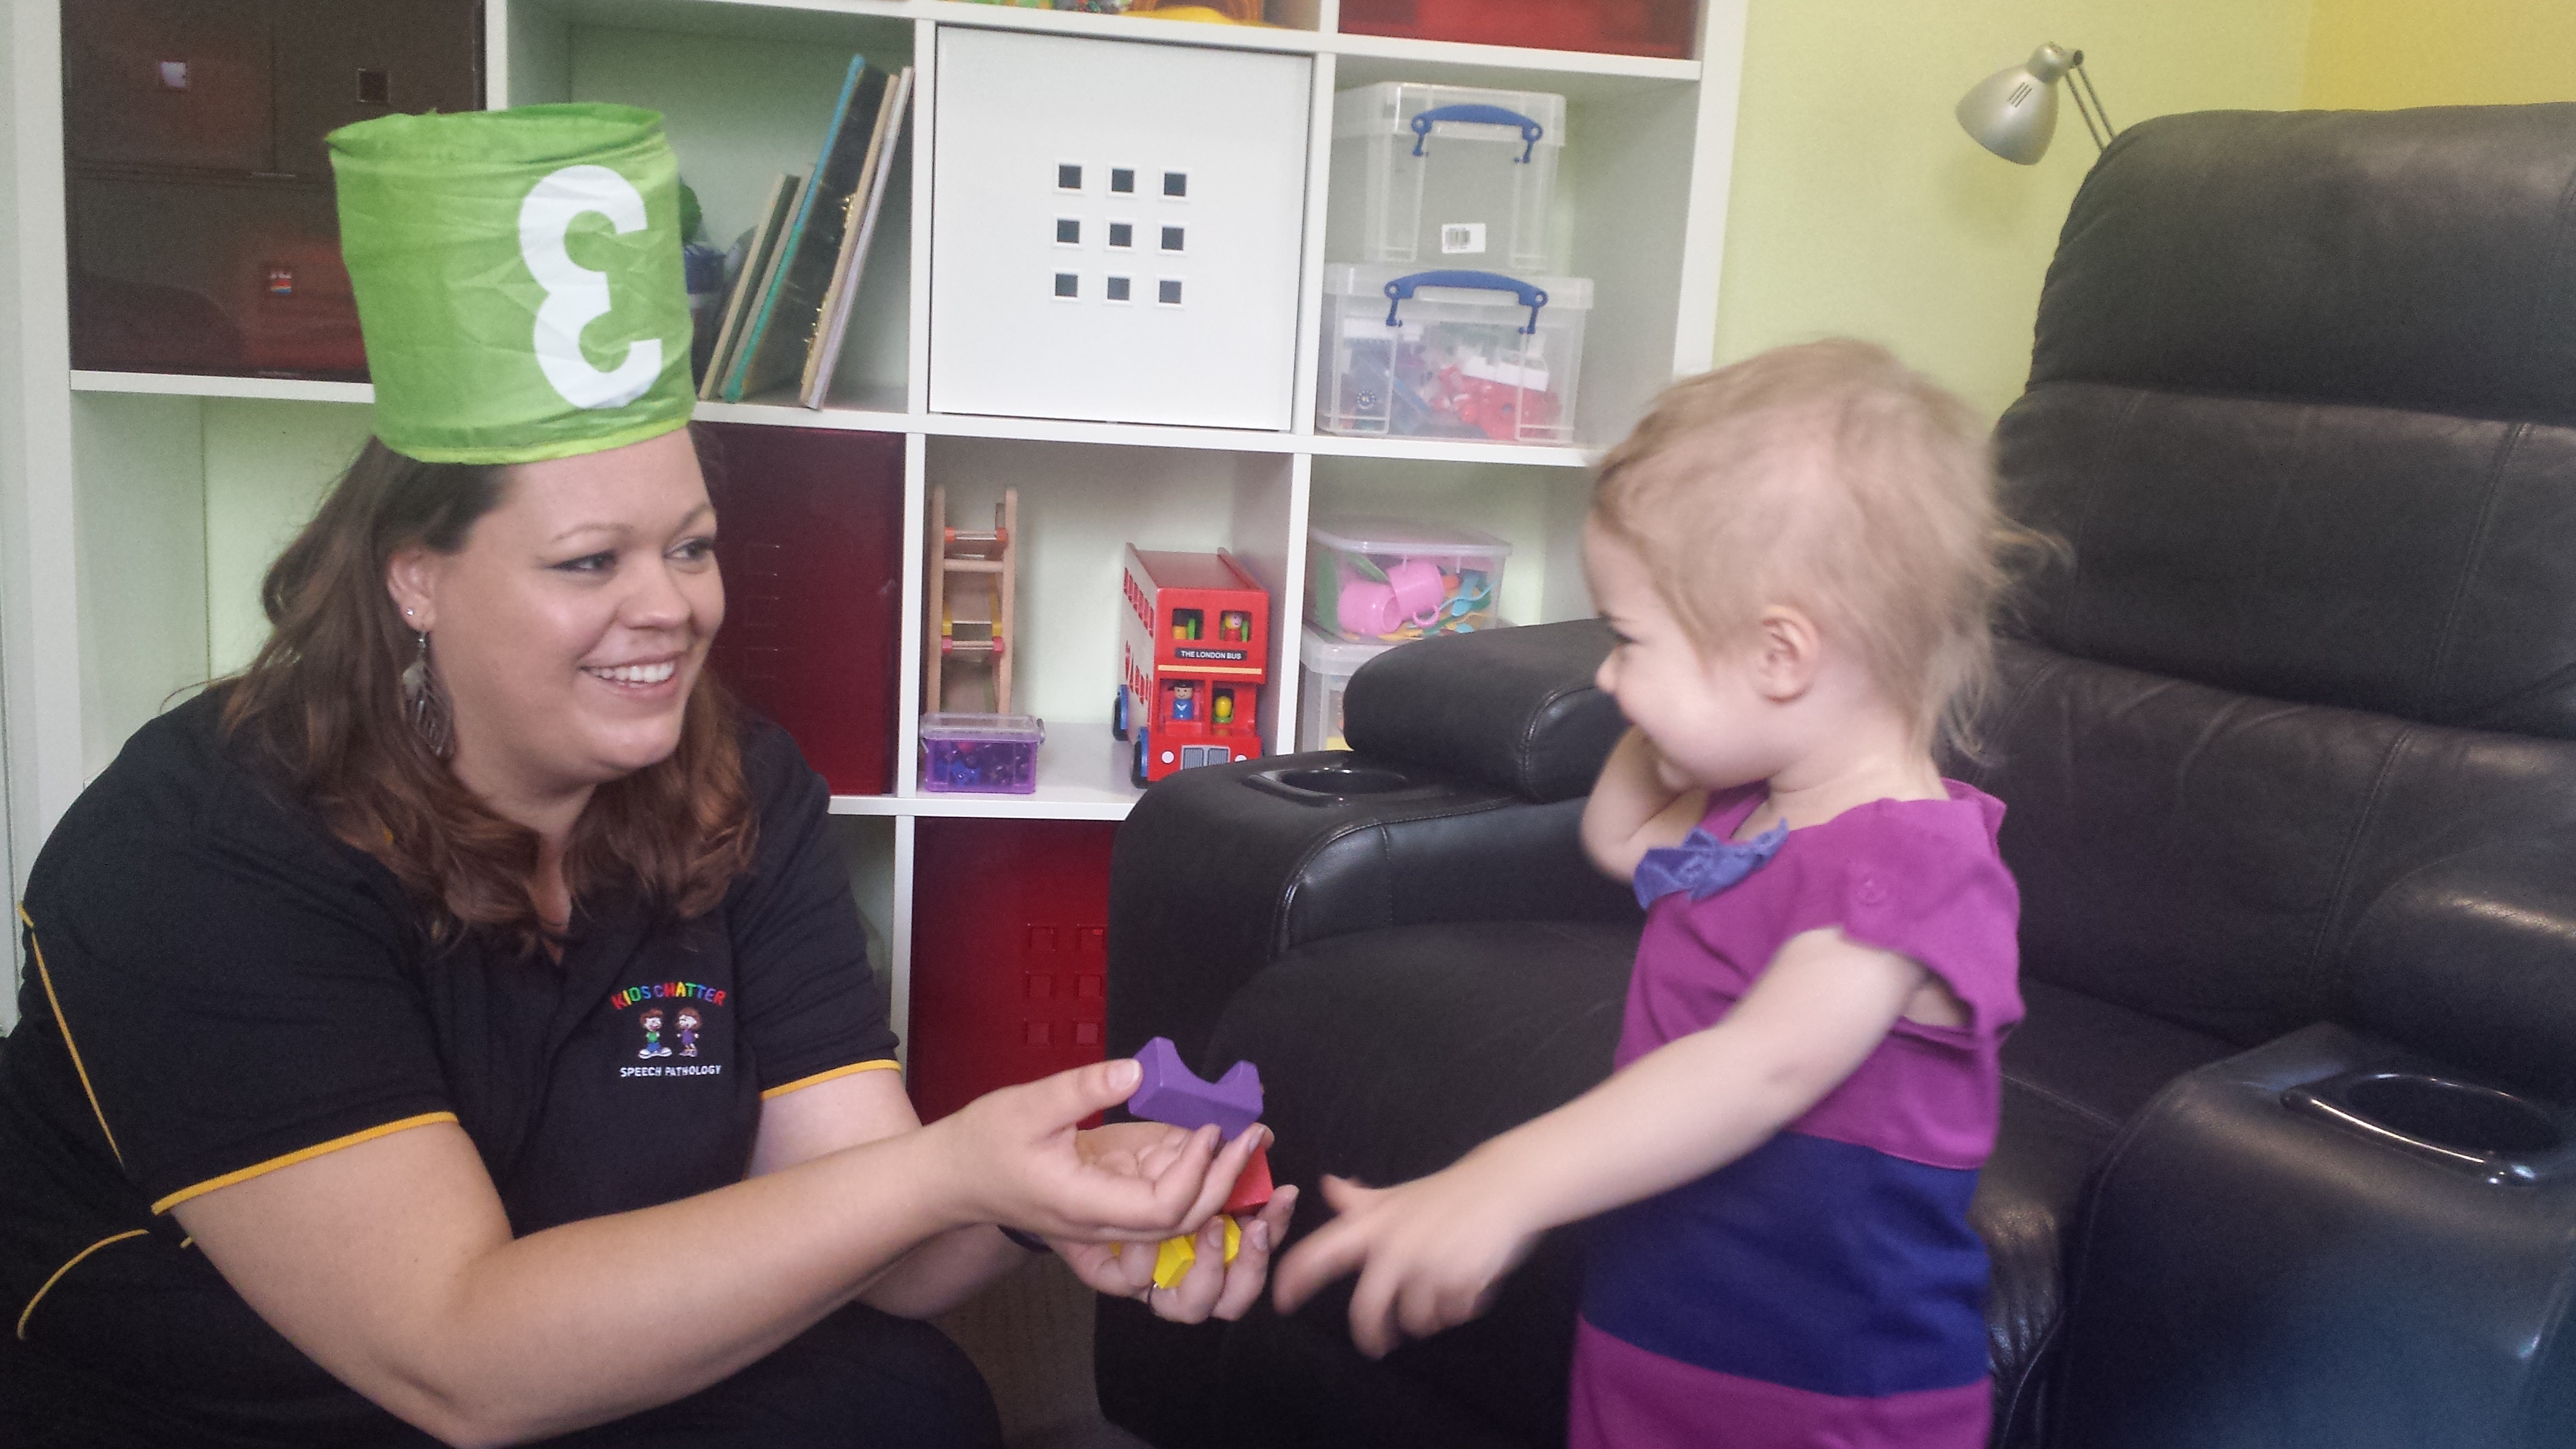 Speech therapist and toddler interacting